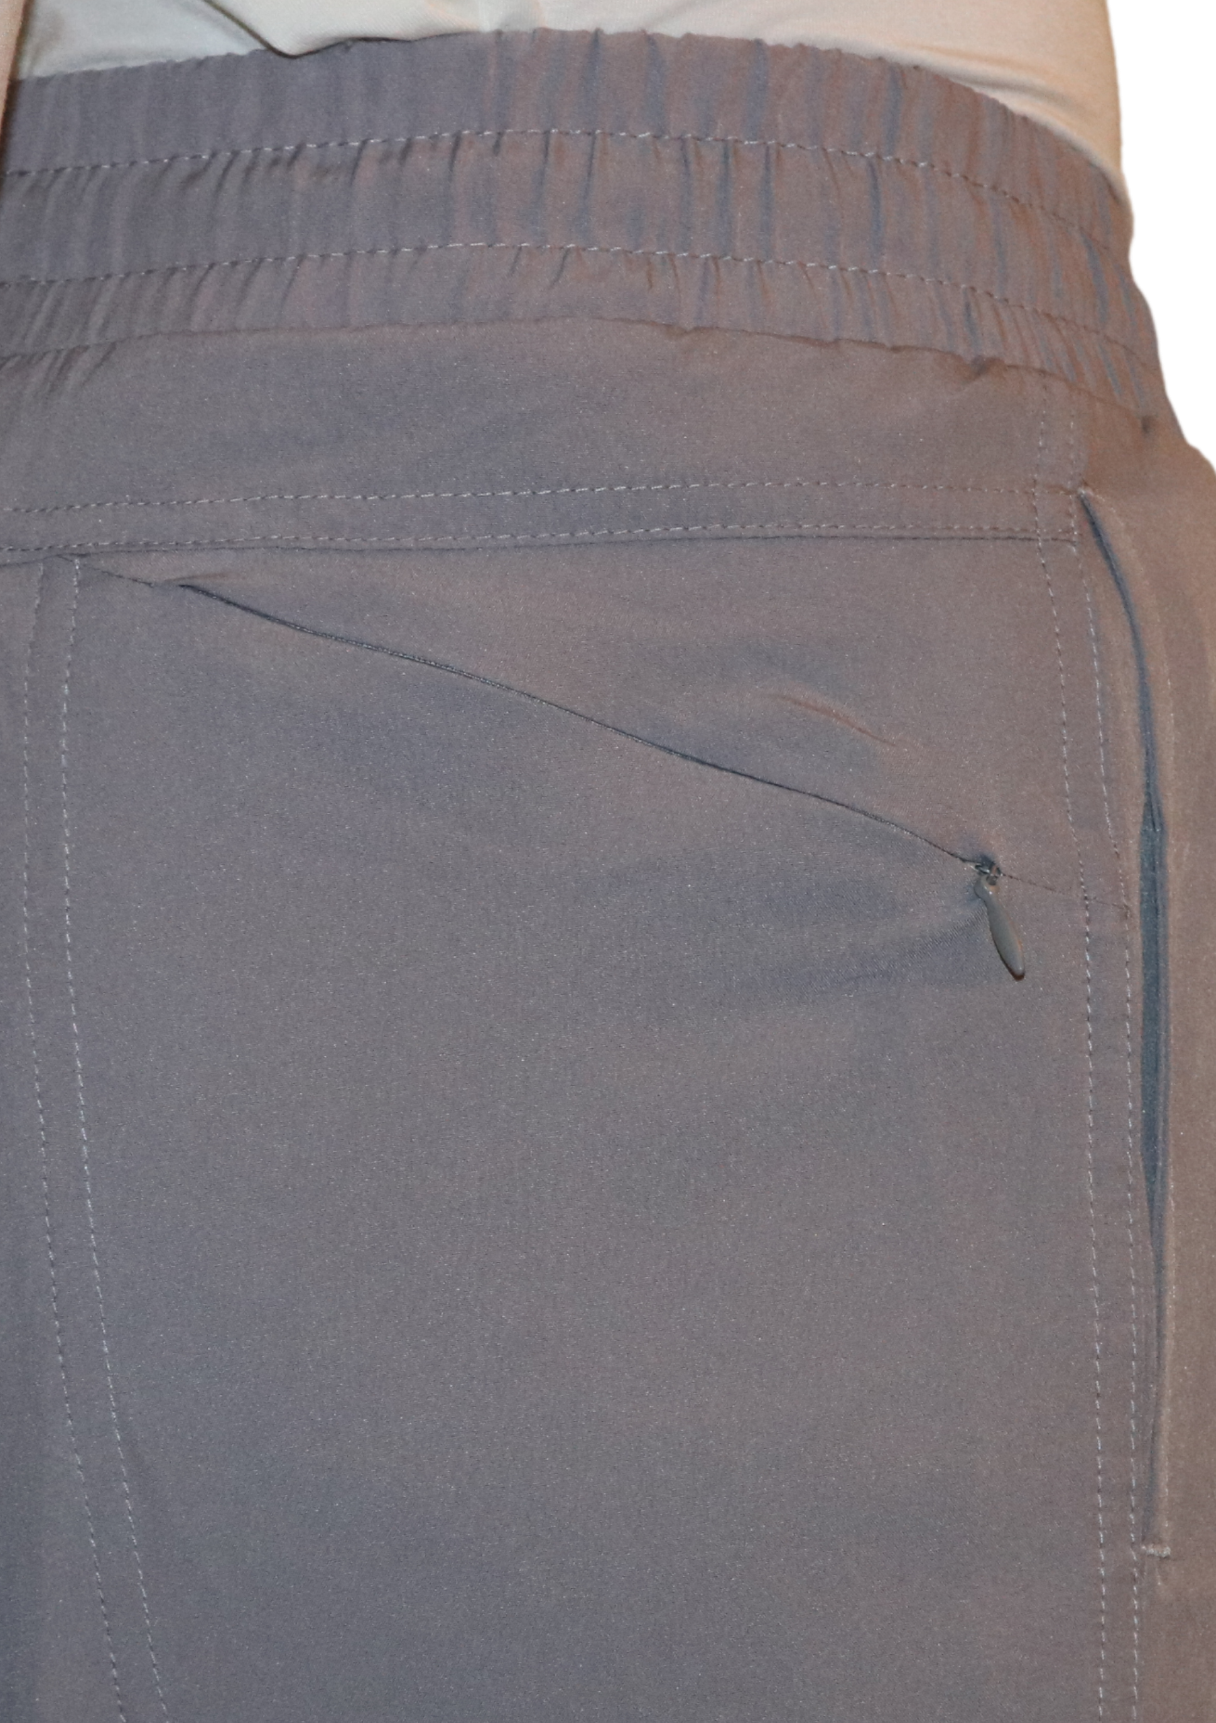 Back zipper pocket of the Bamboo Lined Sabalo Fishing Shorts. These fishing shorts are perfect for long days on the water.